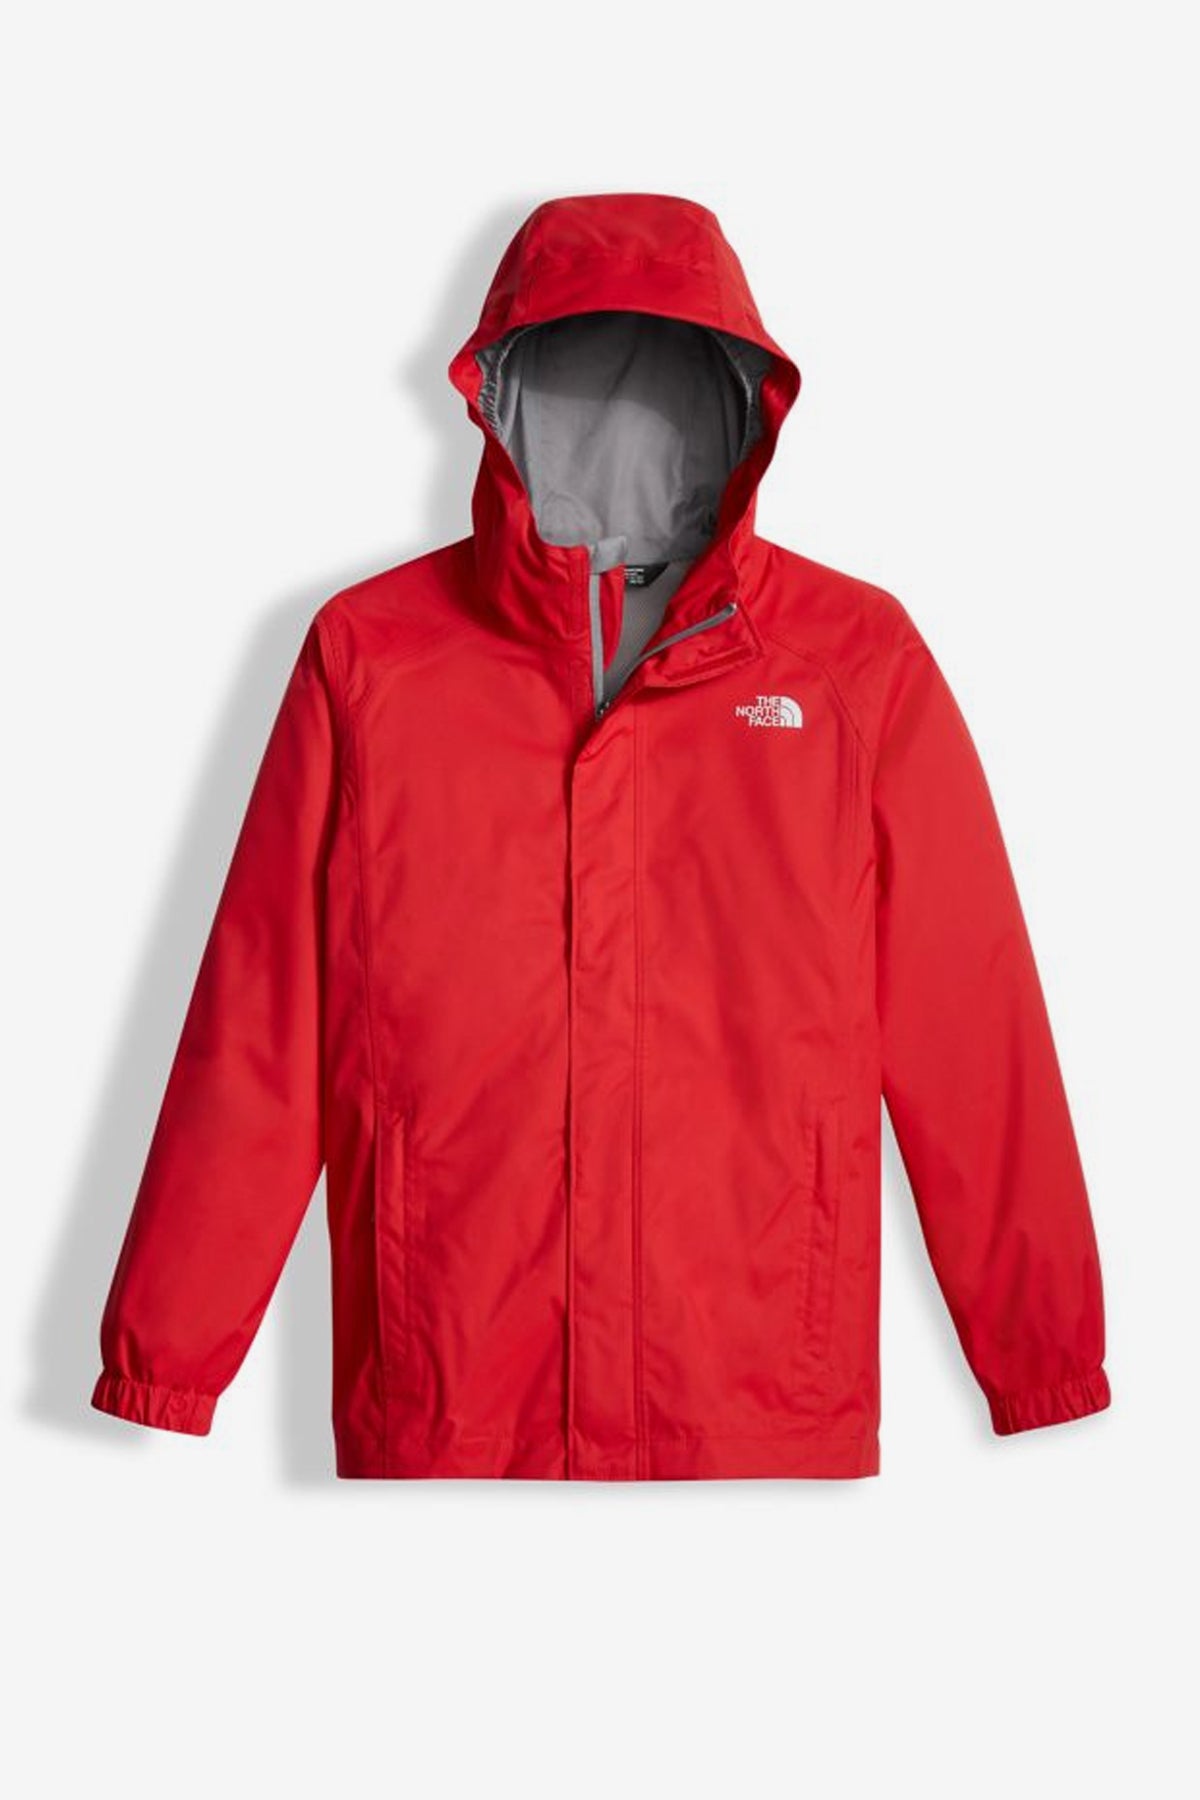 all red north face jacket